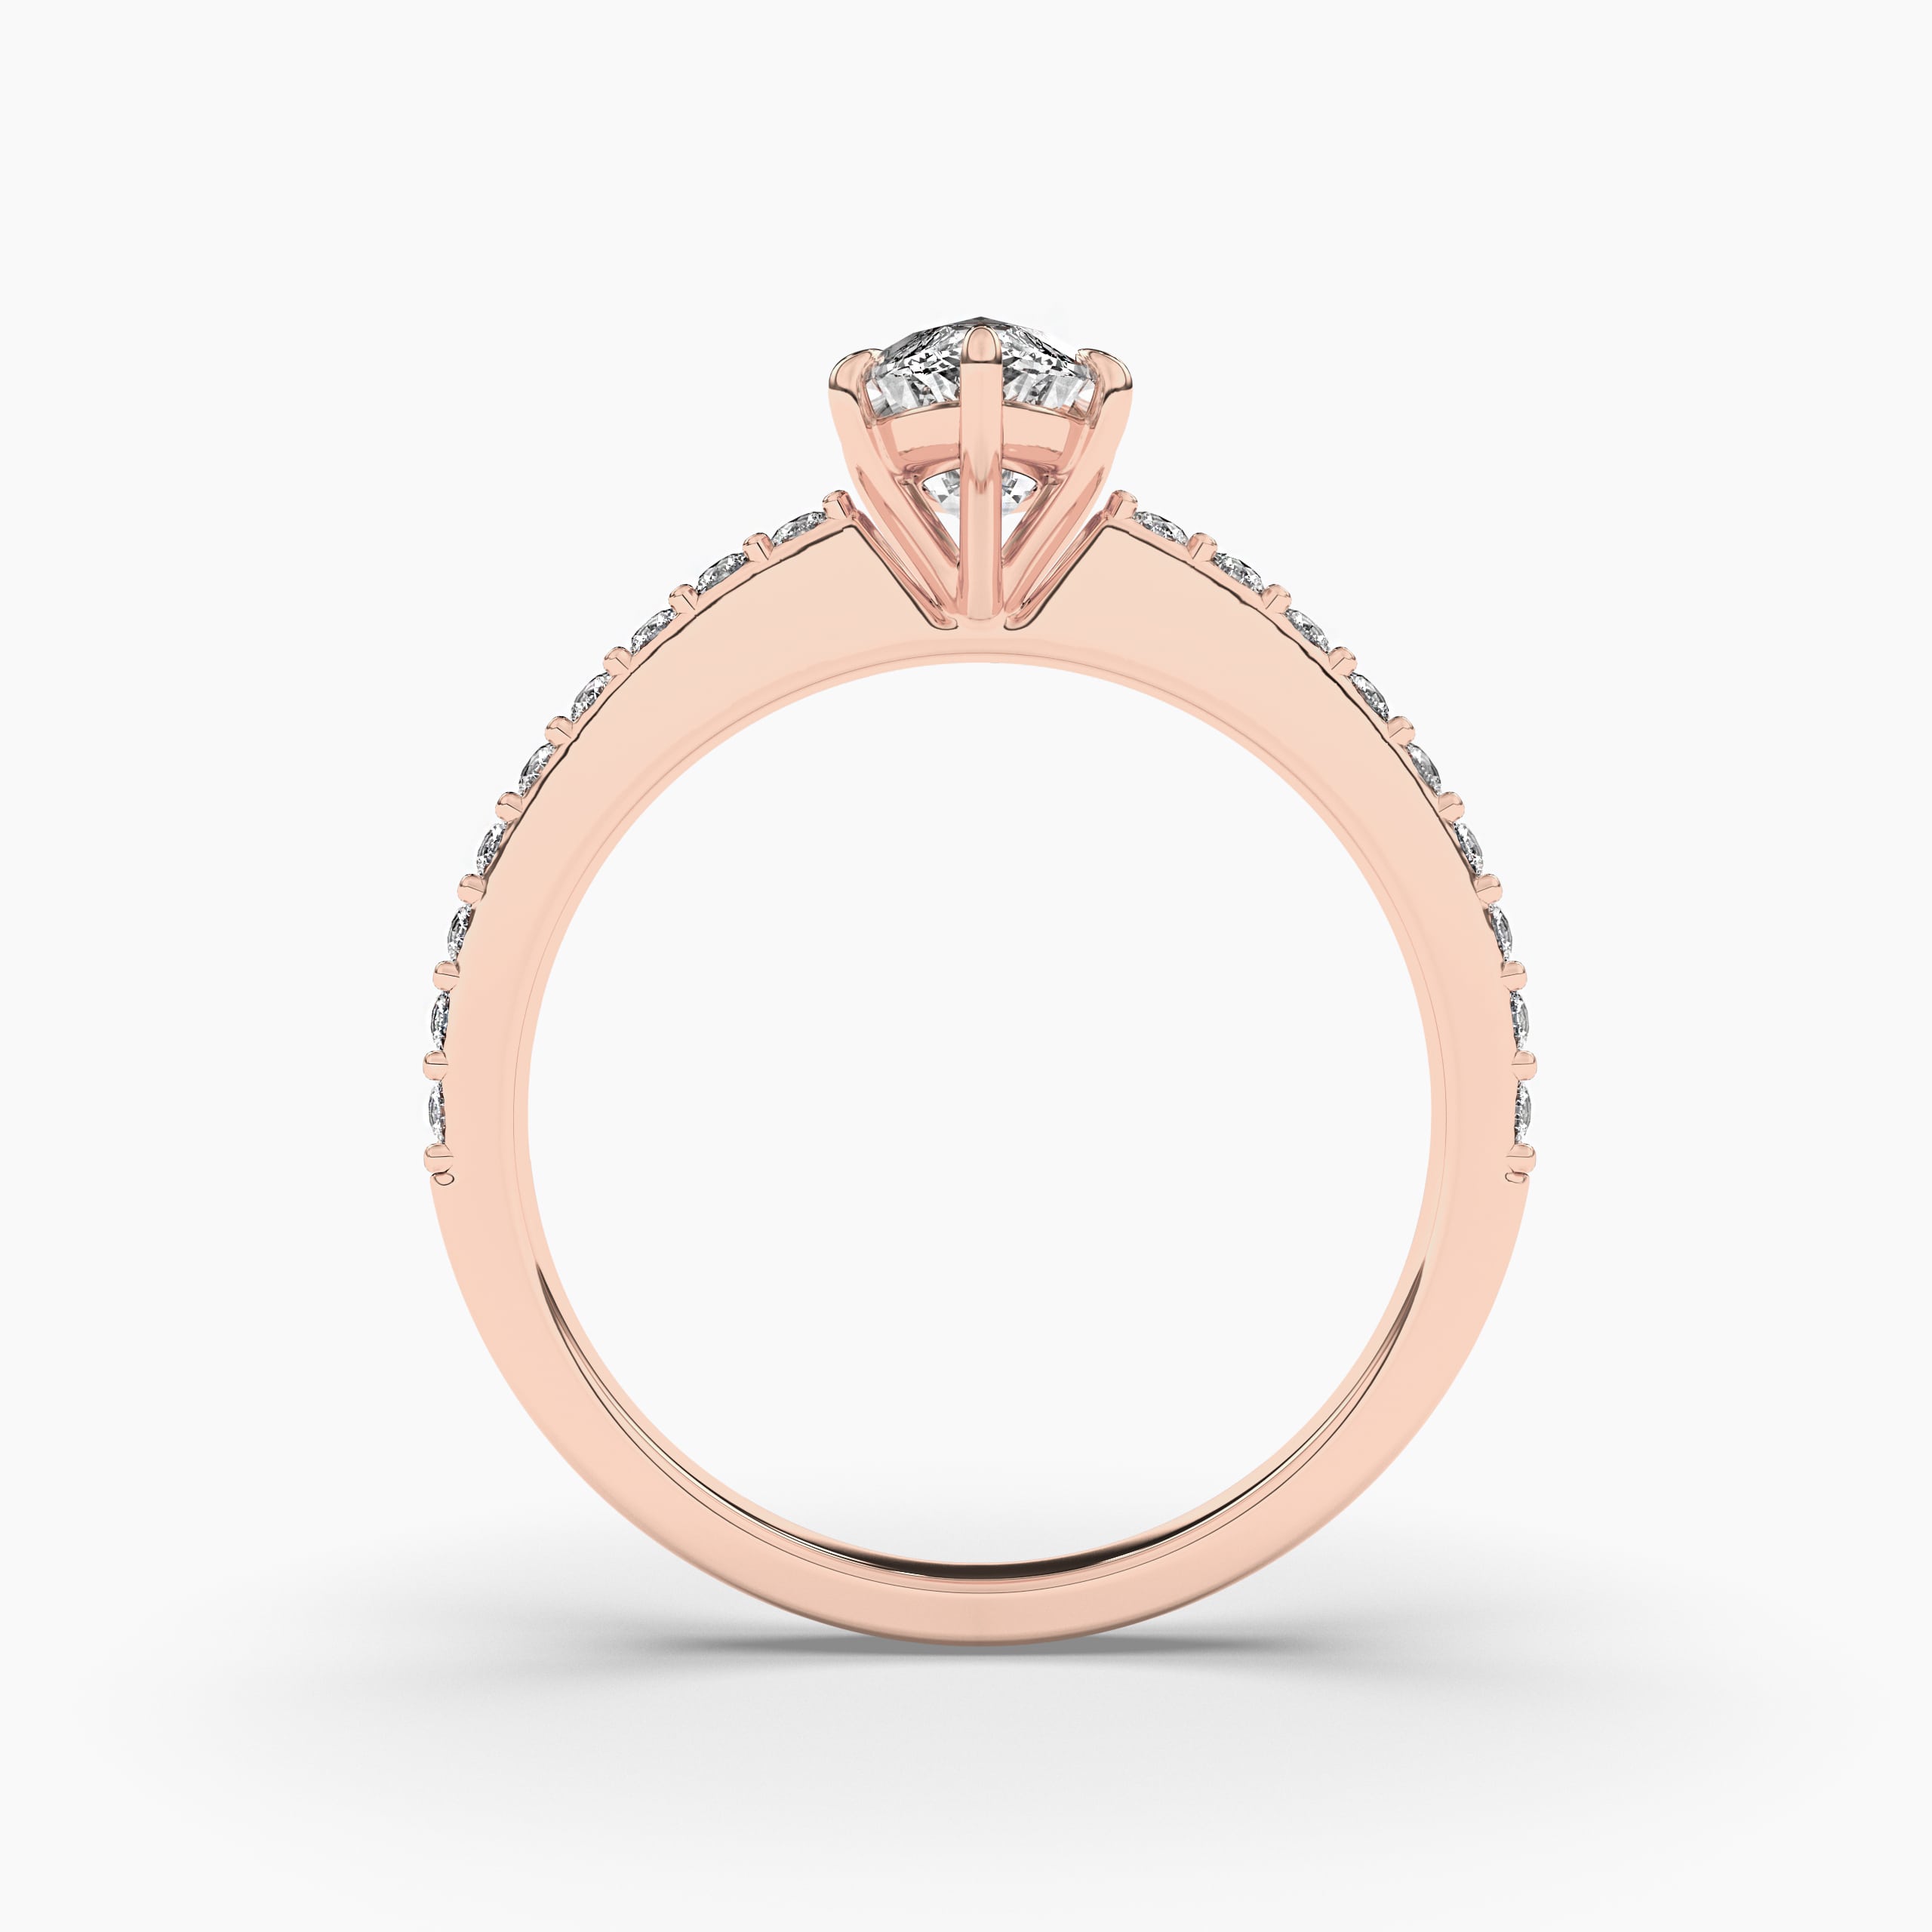 Rose gold marquise engagement rings